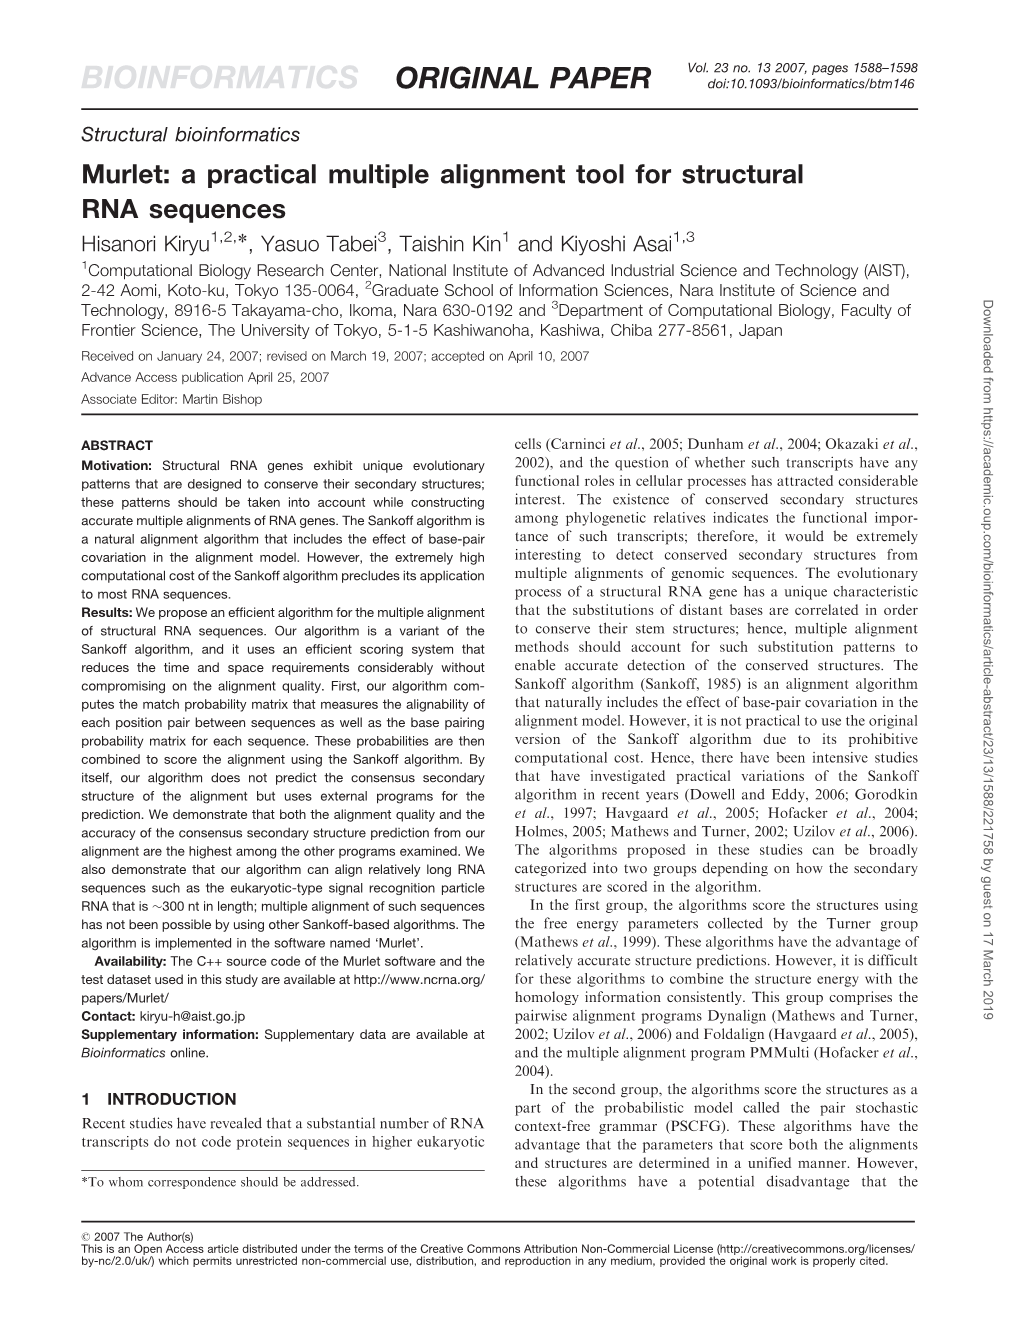 Murlet: a Practical Multiple Alignment Tool for Structural RNA Sequences